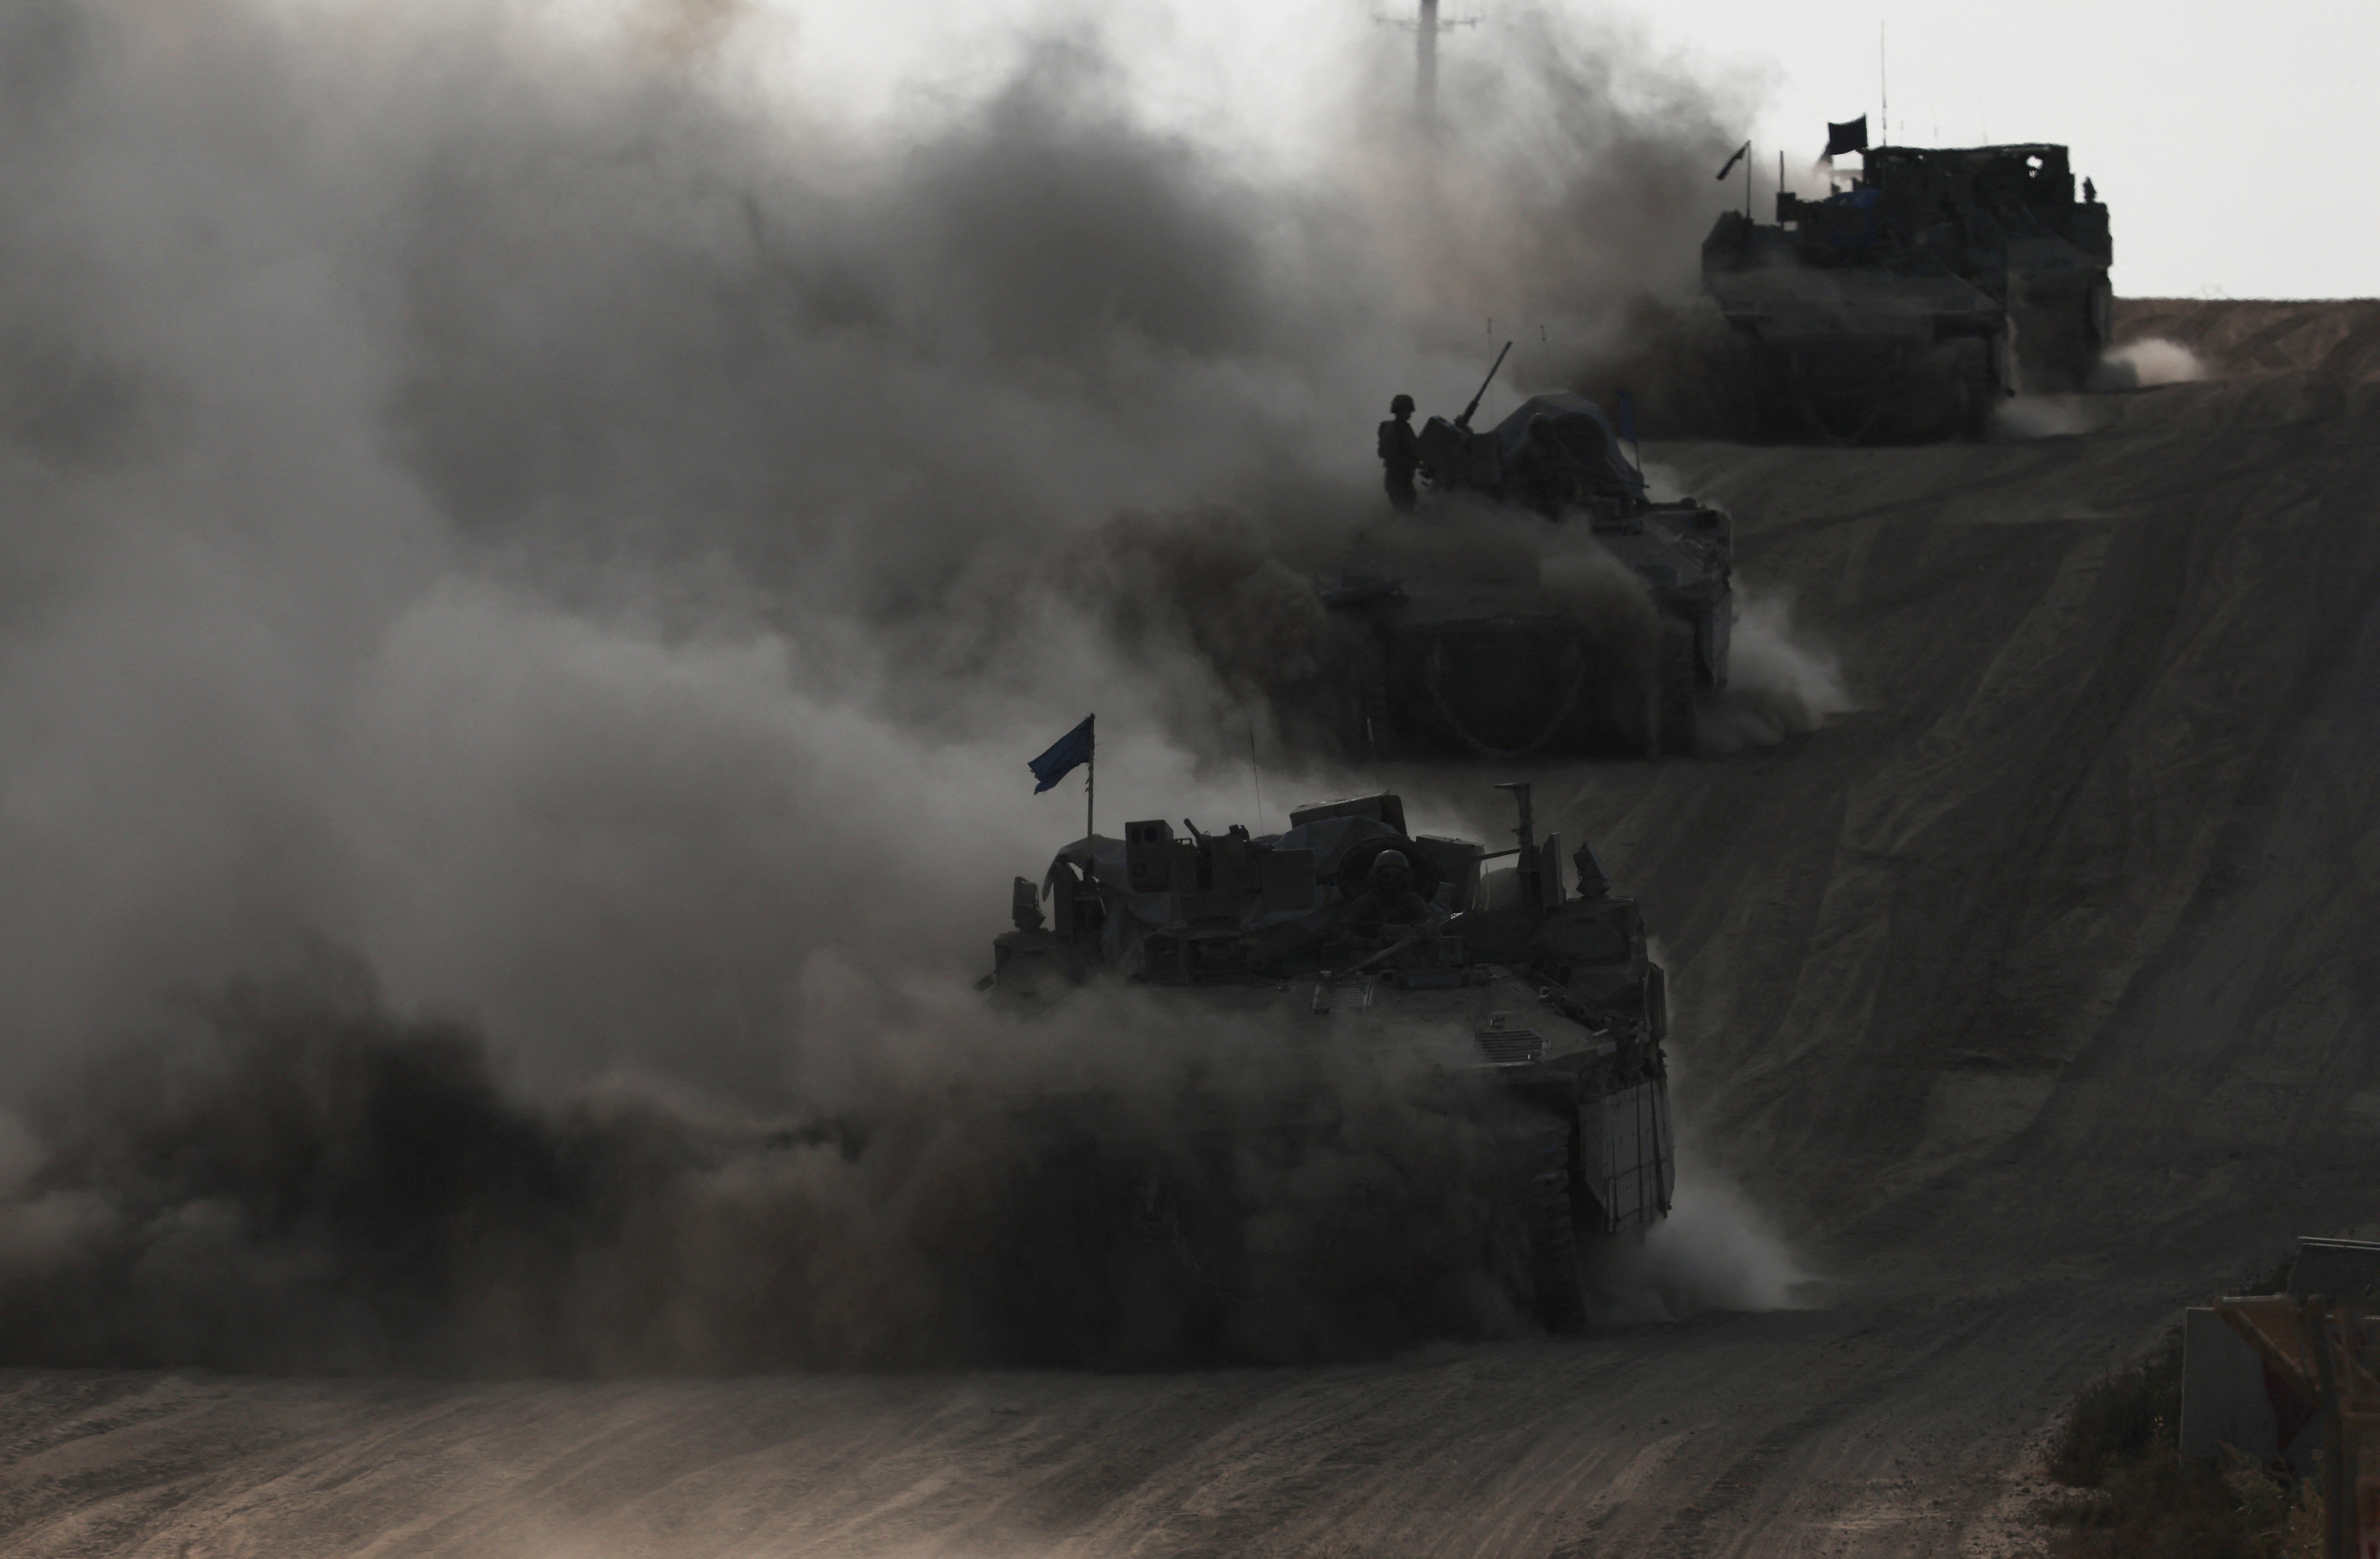 Israeli armoured personnel carriers (APC) operate, amid the ongoing conflict between Israel and the Palestinian Islamist group Hamas, near Israel's border with Gaza in southern Israel